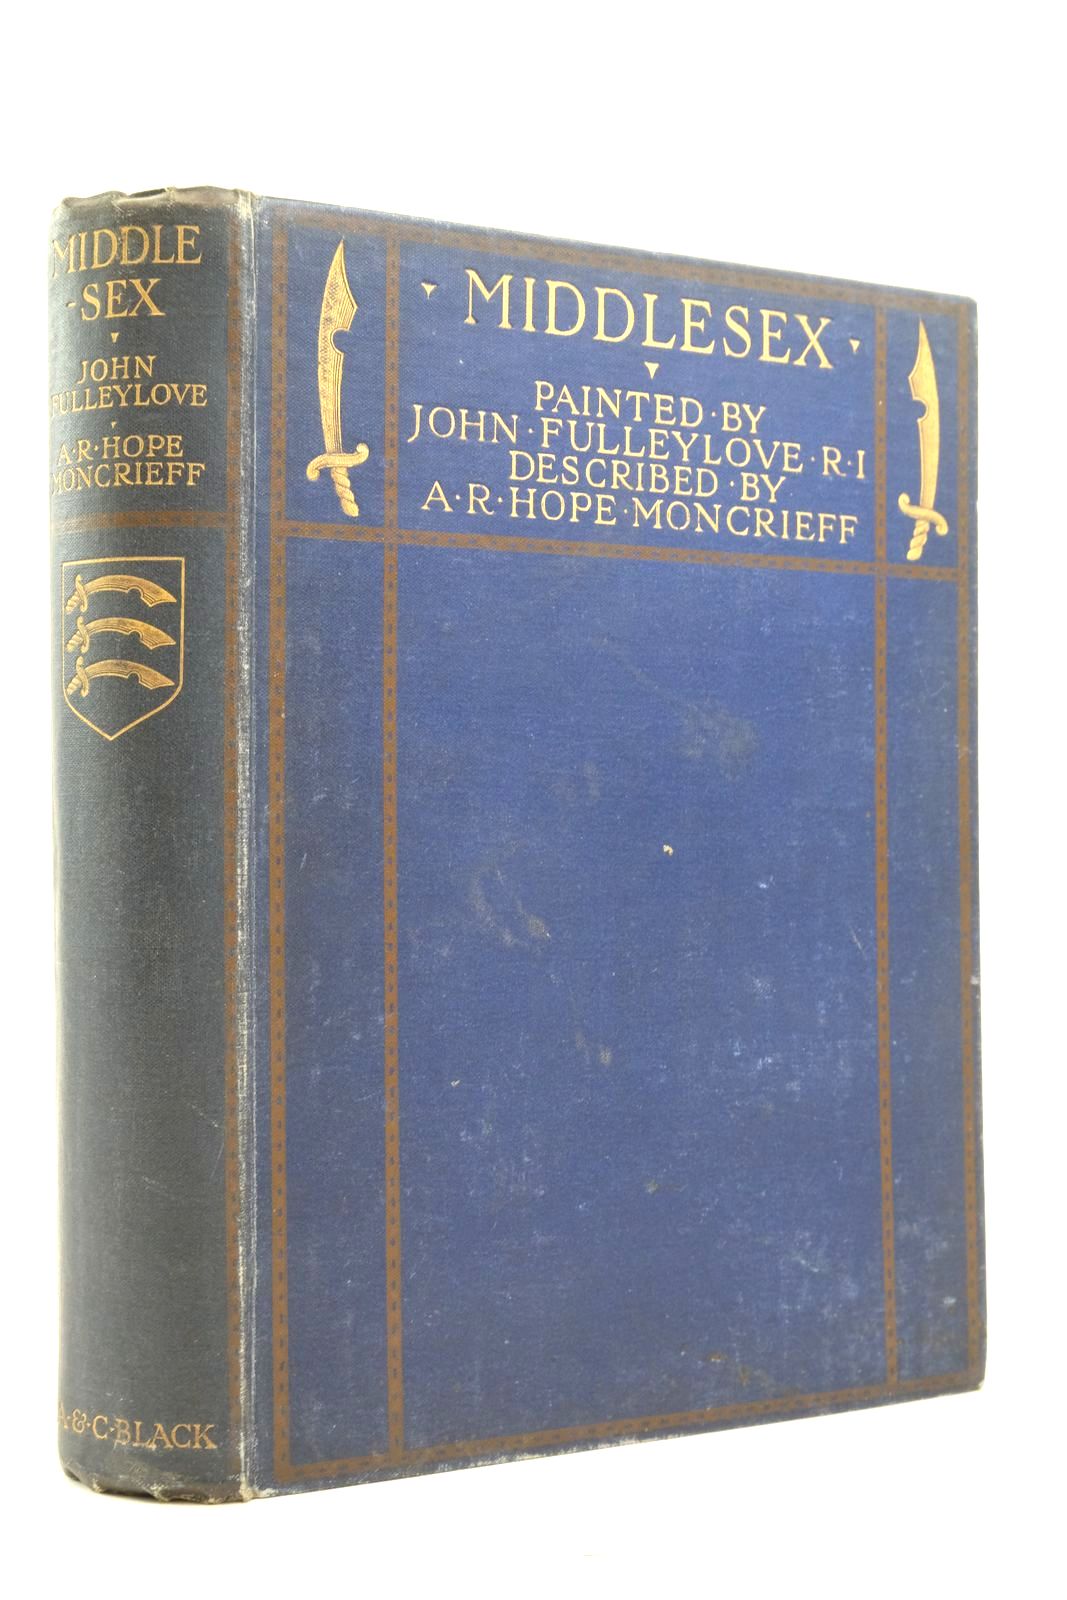 Photo of MIDDLESEX written by Moncrieff, A.R. Hope illustrated by Fulleylove, John published by Adam &amp; Charles Black (STOCK CODE: 2137118)  for sale by Stella & Rose's Books